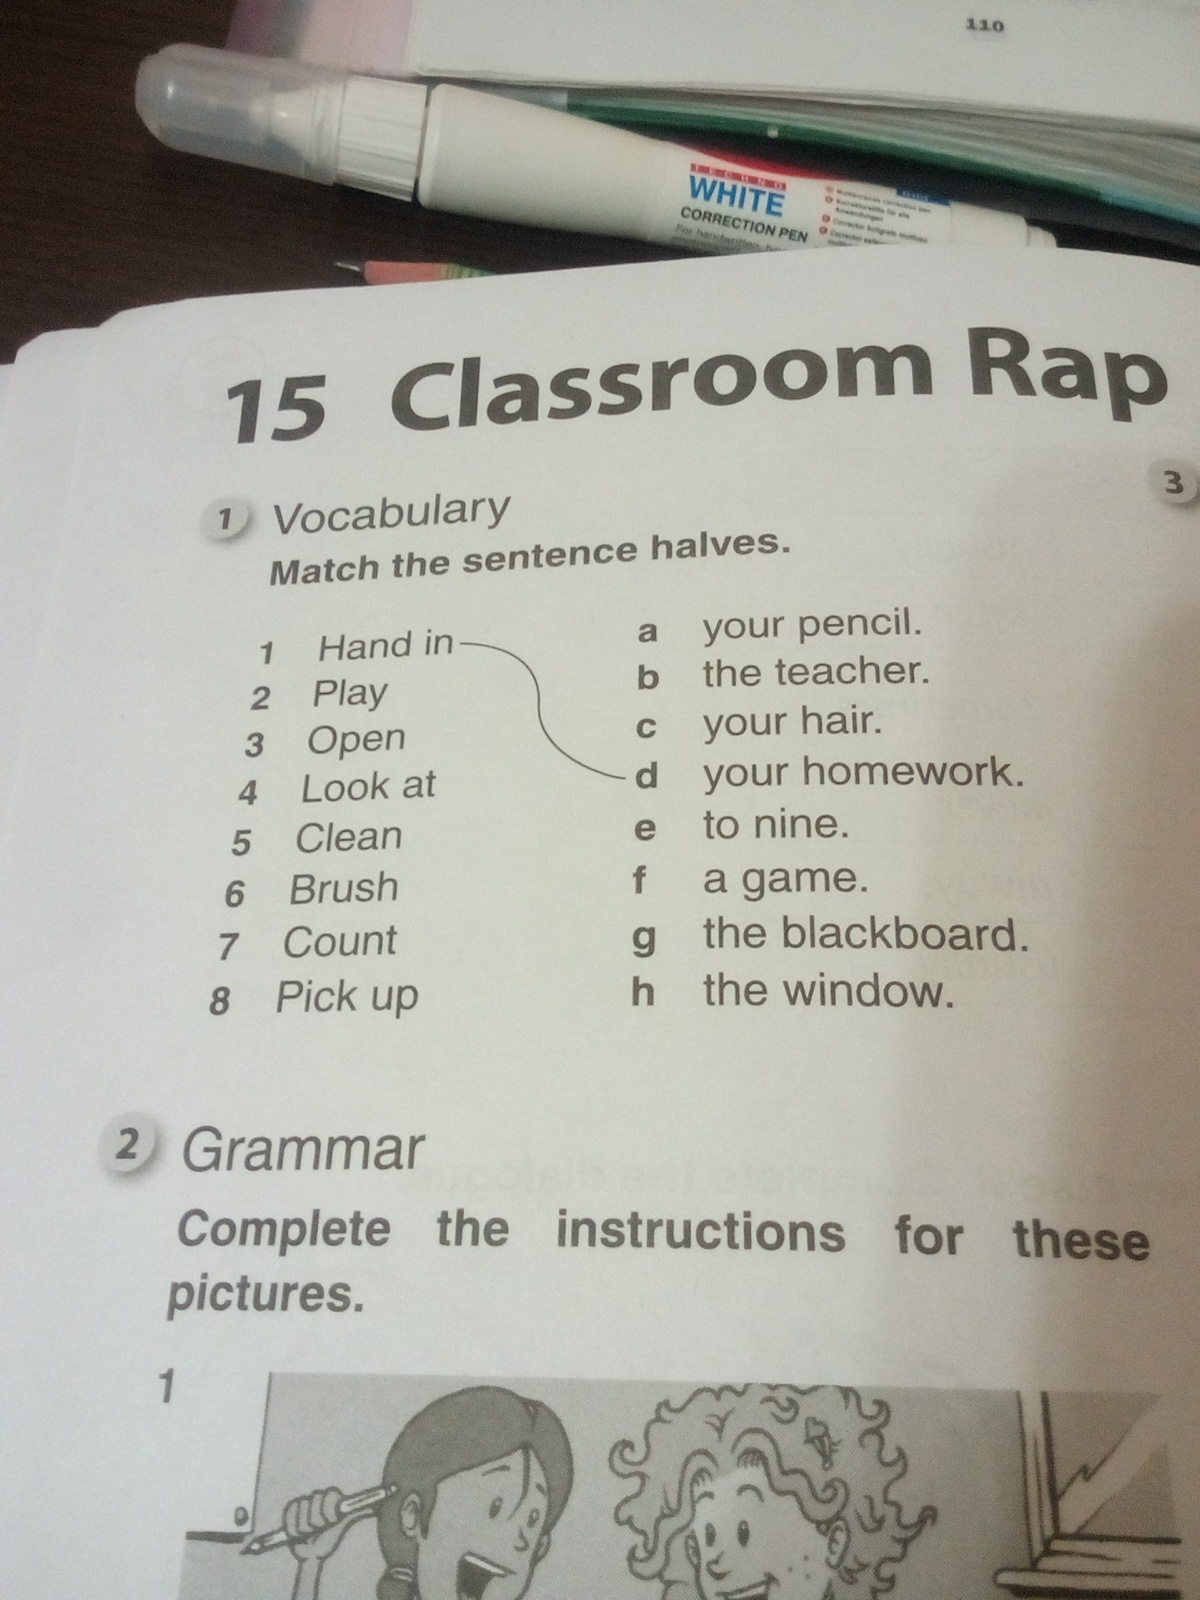 B match the sentence halves. Match the sentence halves you can. Match the halves of the sentences. How old.... Hand in your homework. Rap Vocabulary.